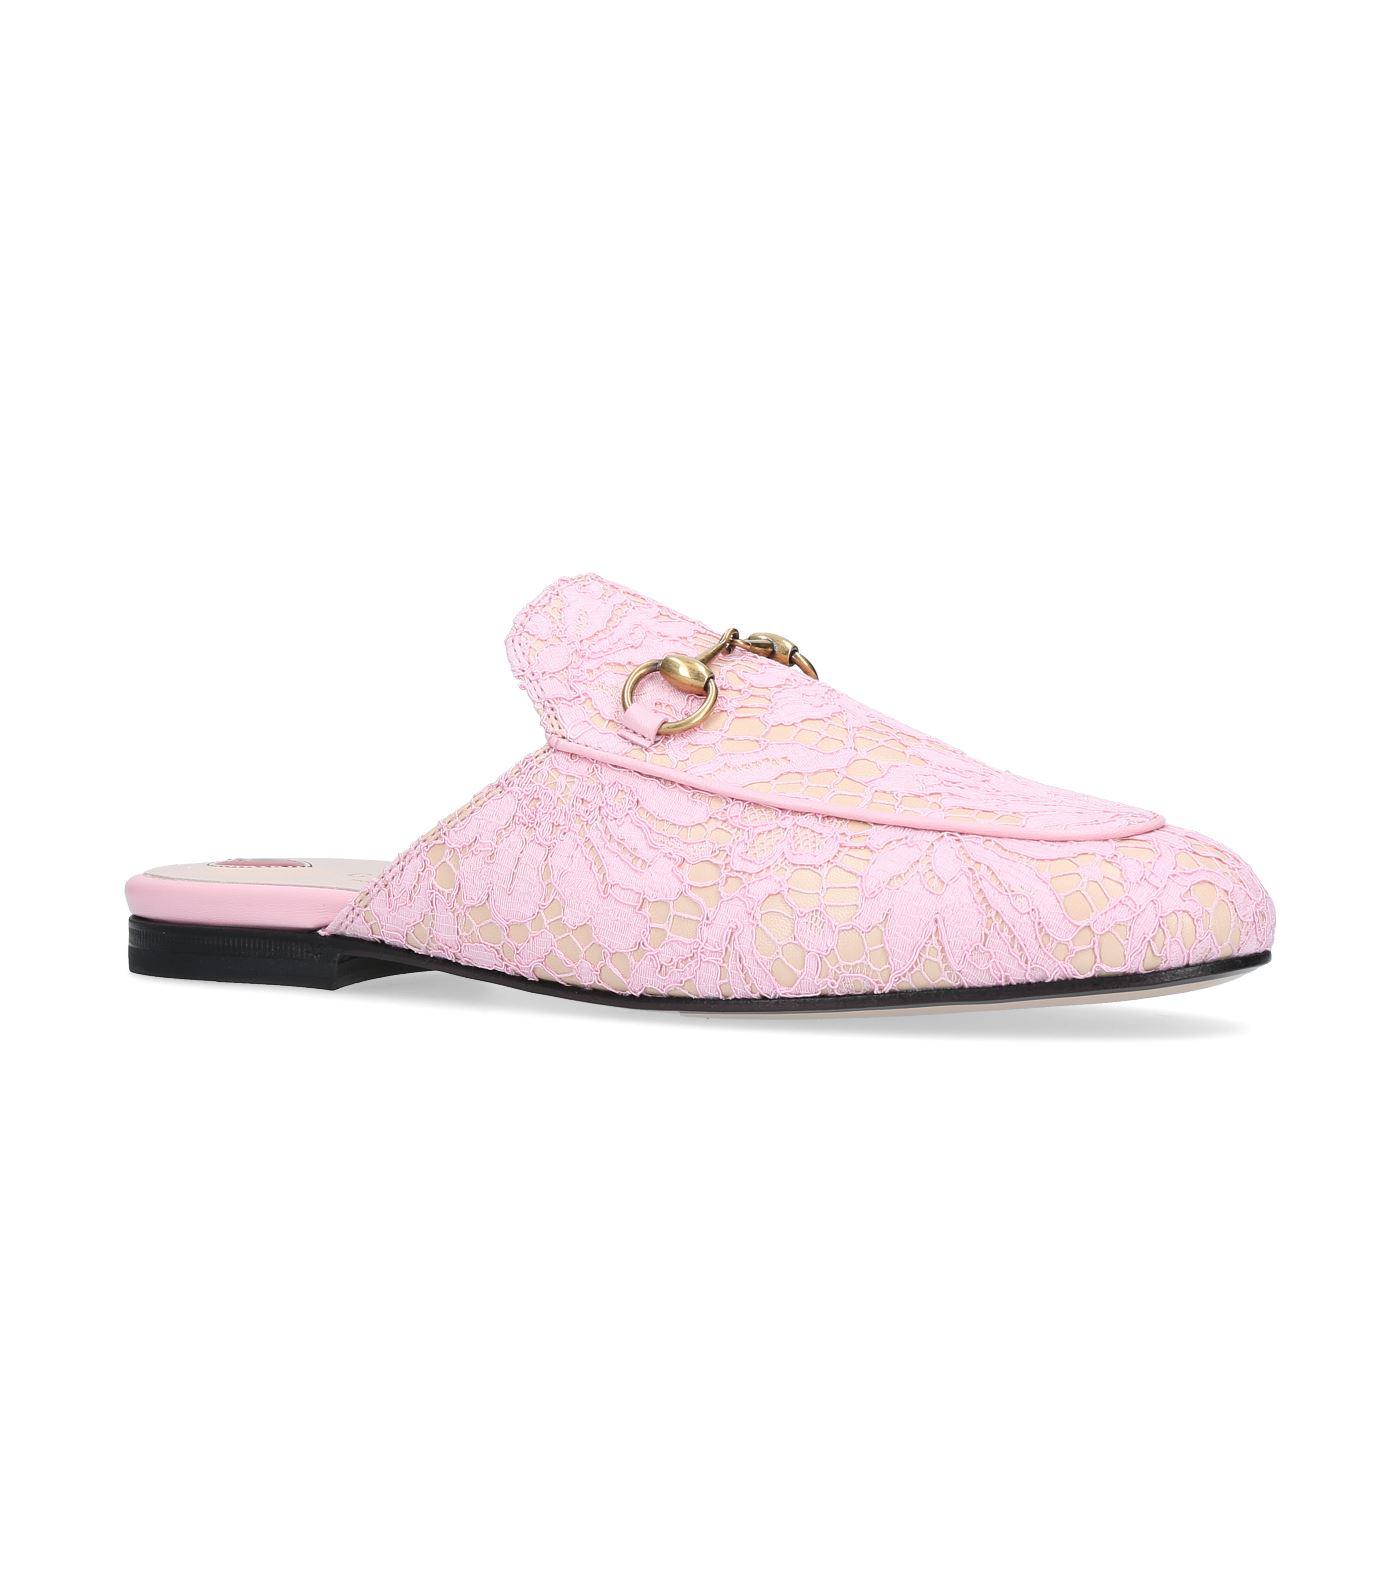 Gucci Princetown Lace Slippers in Pink - Lyst